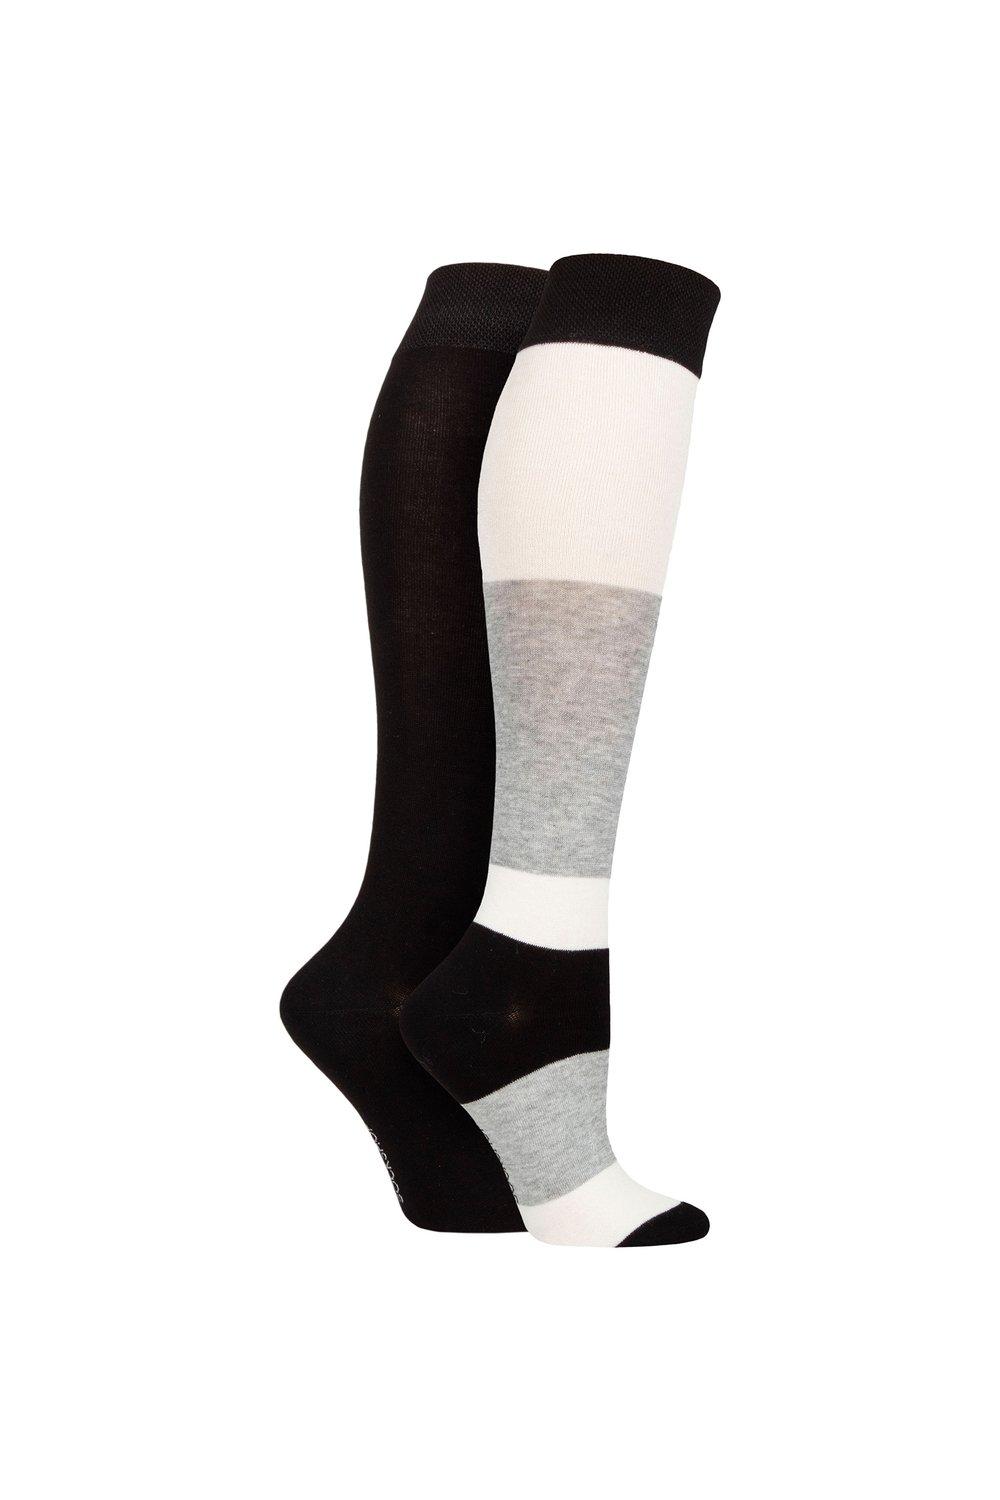 2 Pair Plain and Patterned Bamboo Knee High Socks with Smooth Toe Seams